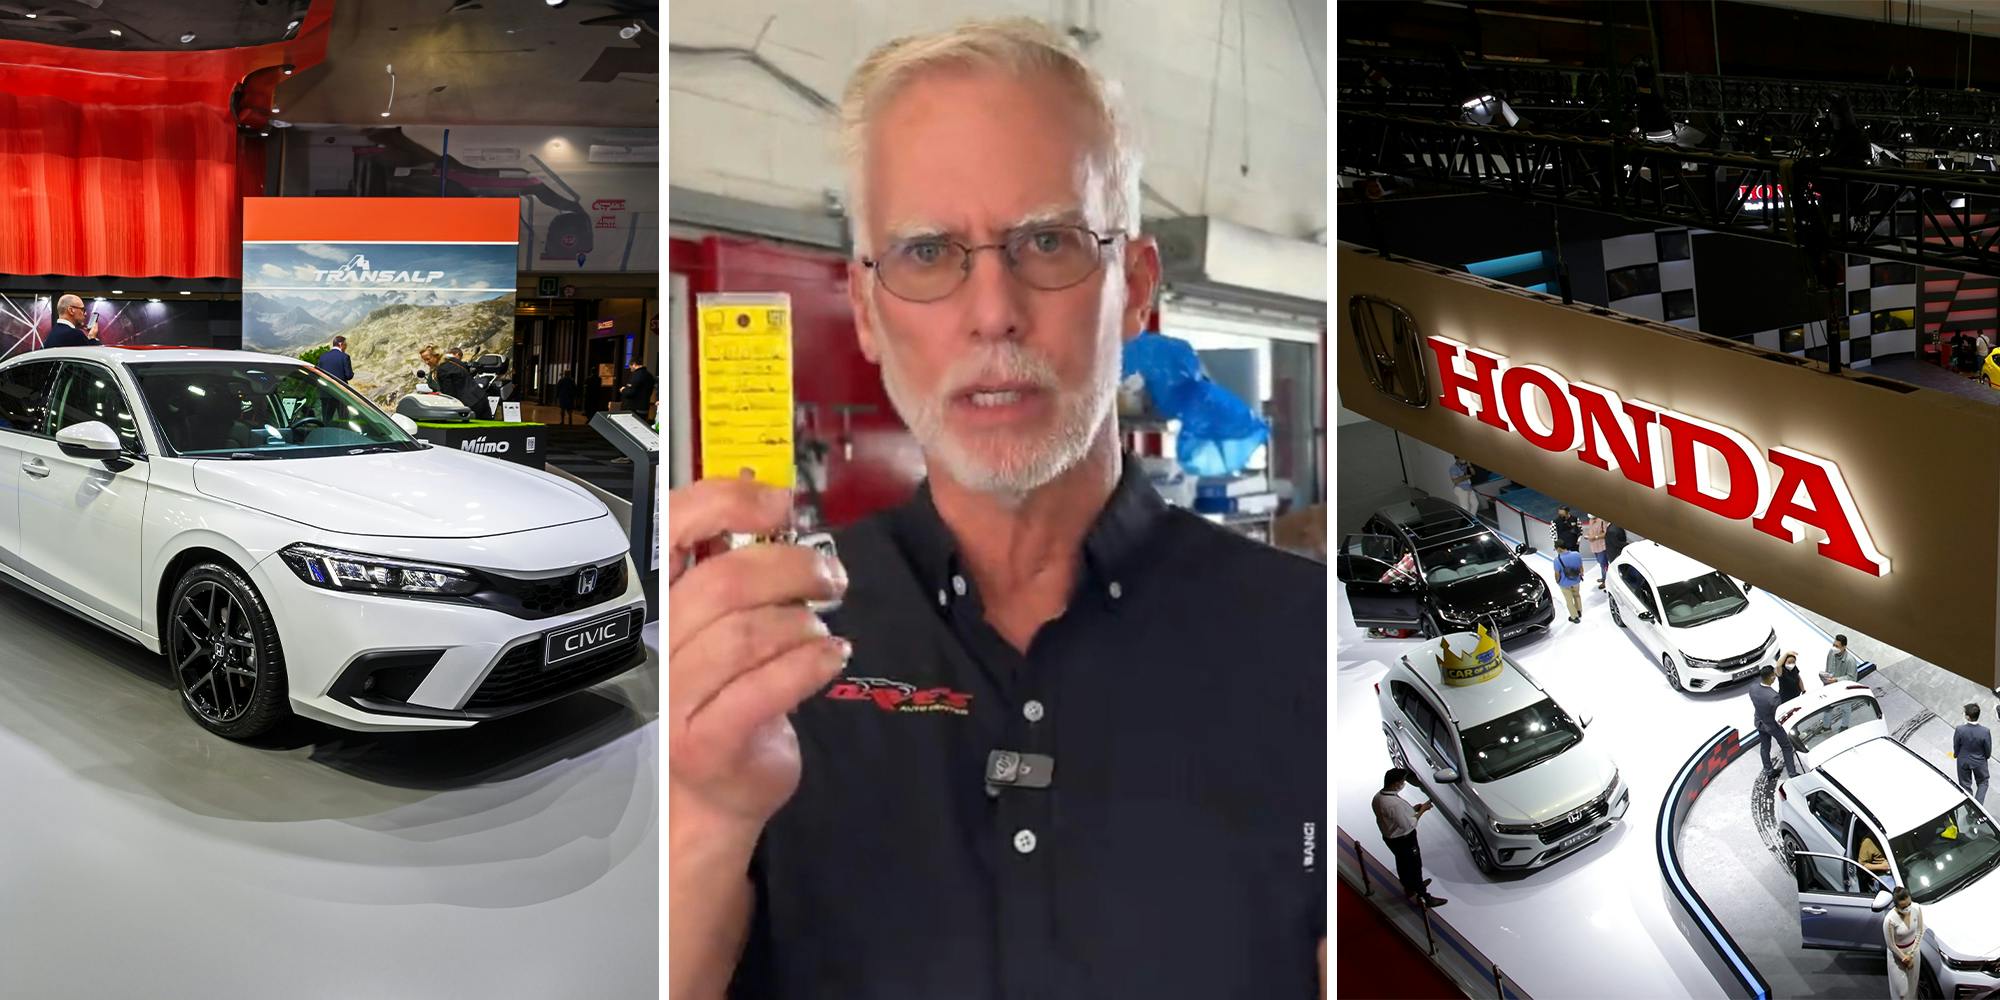 Man buys used 2023 Honda Civic and brings it to mechanic for final inspection